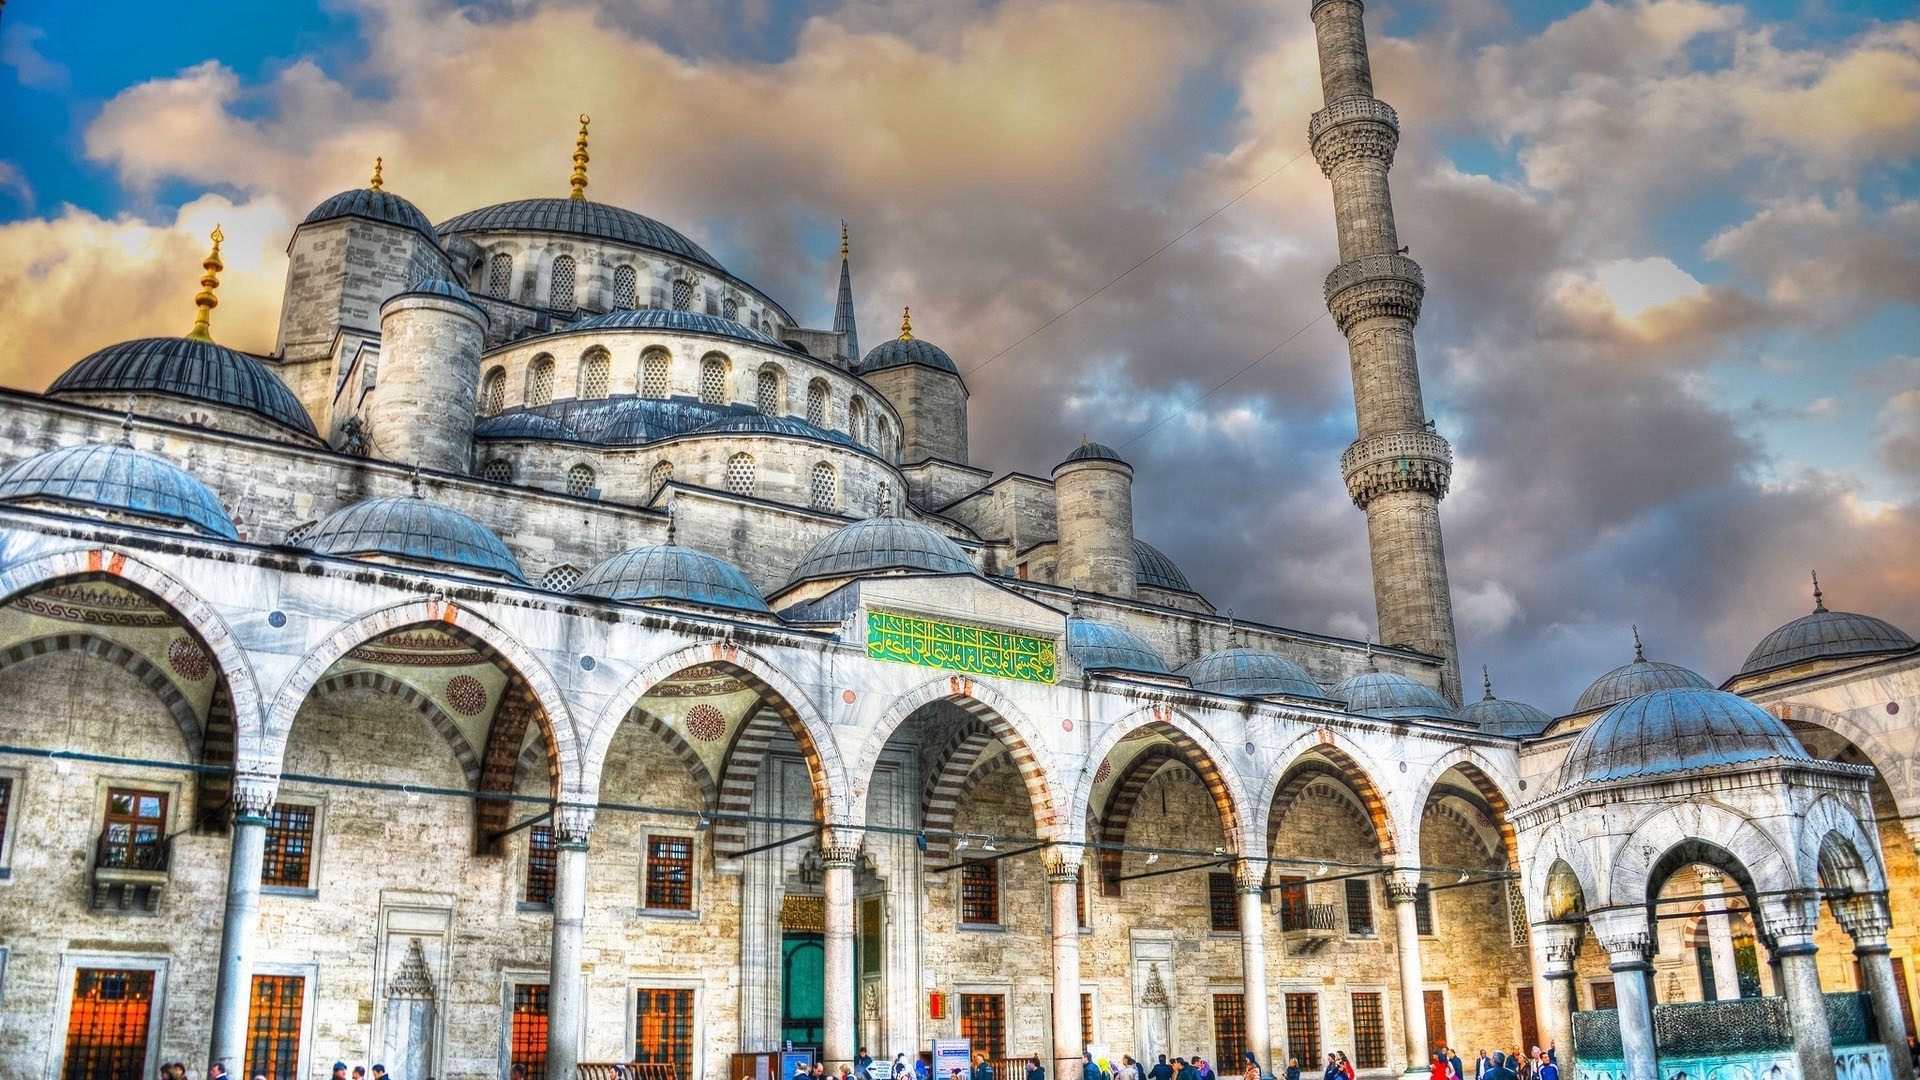 Sultan Ahmed Mosque, Mosques, Istanbul, Turkey, Islamic architecture, Clouds, Old building, Architecture Wallpaper